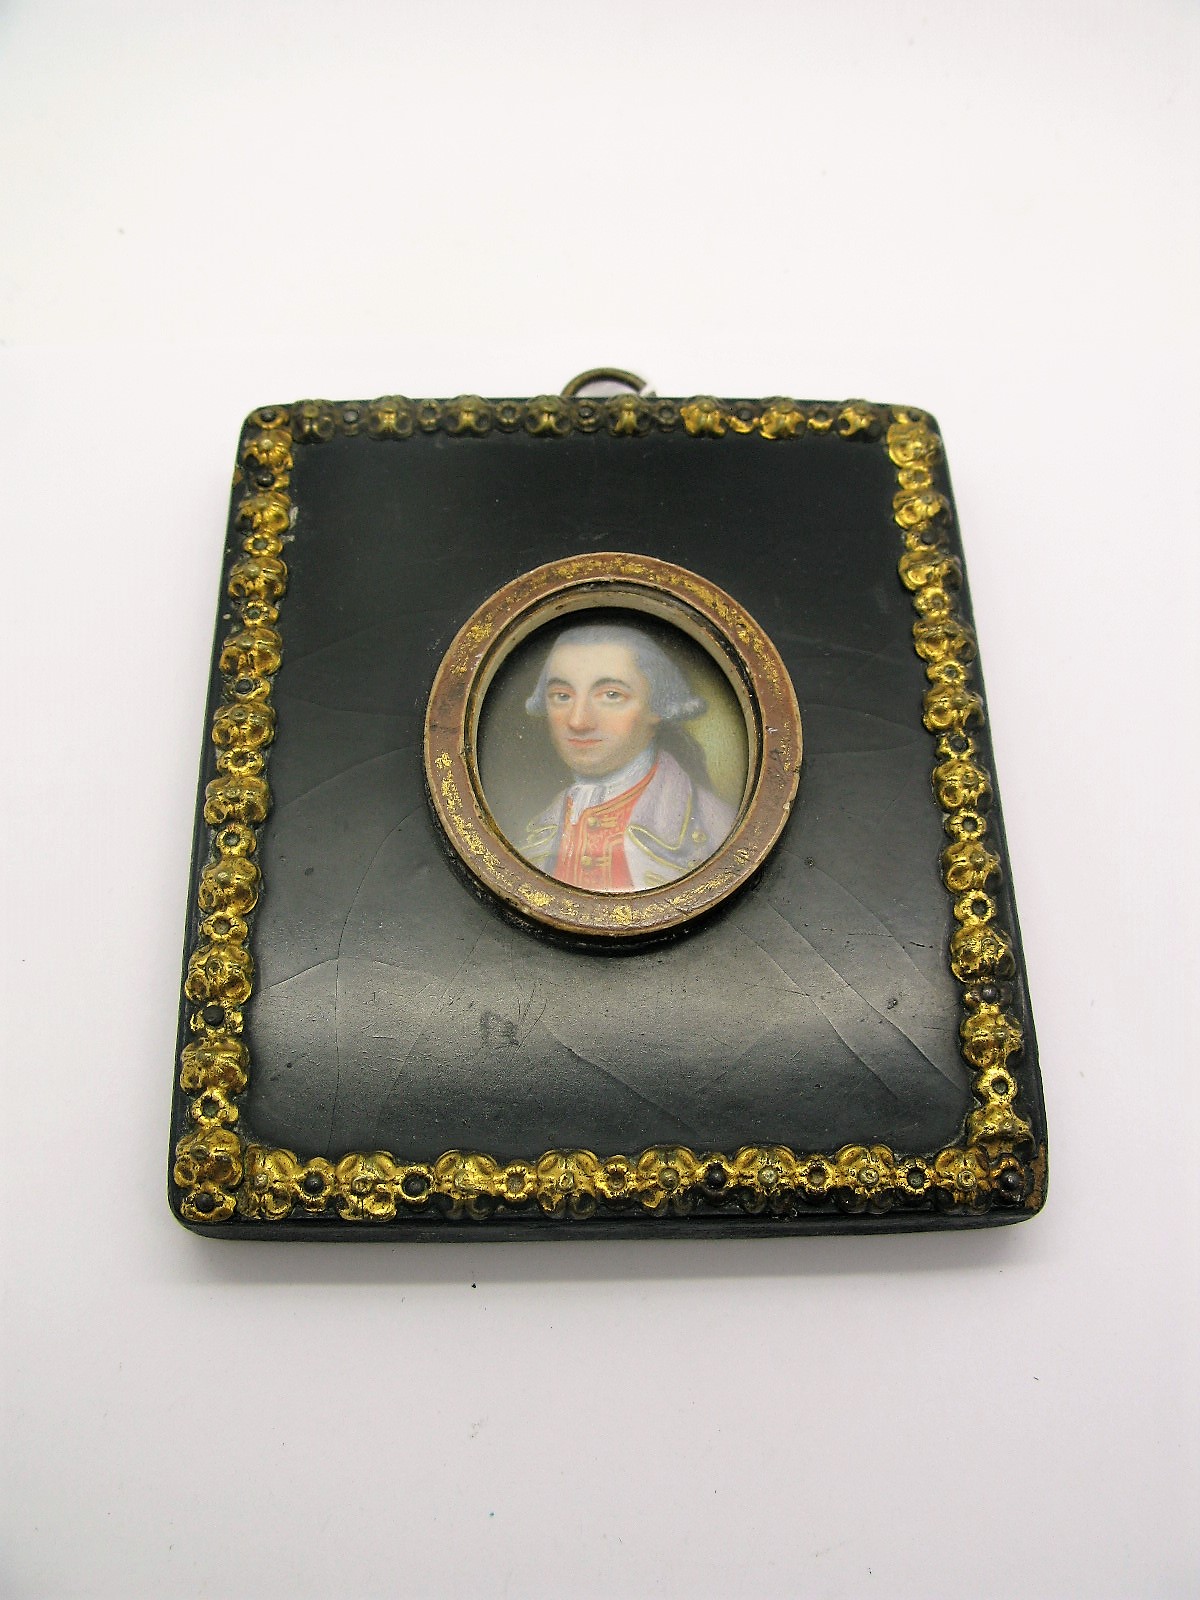 NATHANIEL HONE R.A. (1718-1784) Portrait Miniature of a gentleman, with powdered hair, wearing a - Image 2 of 4